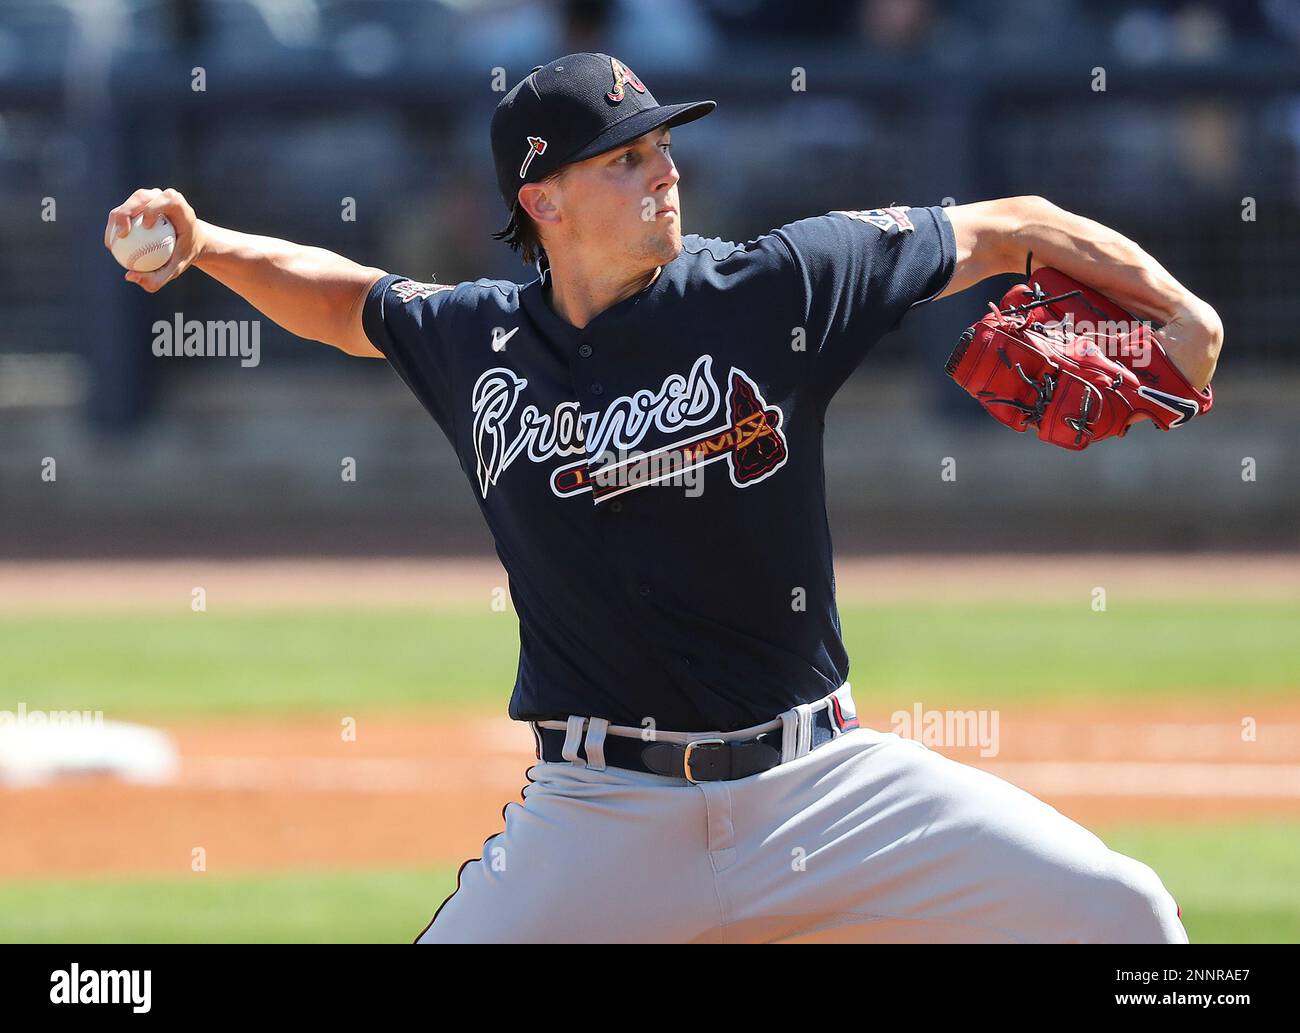 April 09, 2022: Atlanta Braves pitcher Kyle Wright delivers a pitch during  the first inning of a MLB game against the Cincinnati Reds at Truist Park  in Atlanta, GA. Austin McAfee/CSM/Sipa USA(Credit